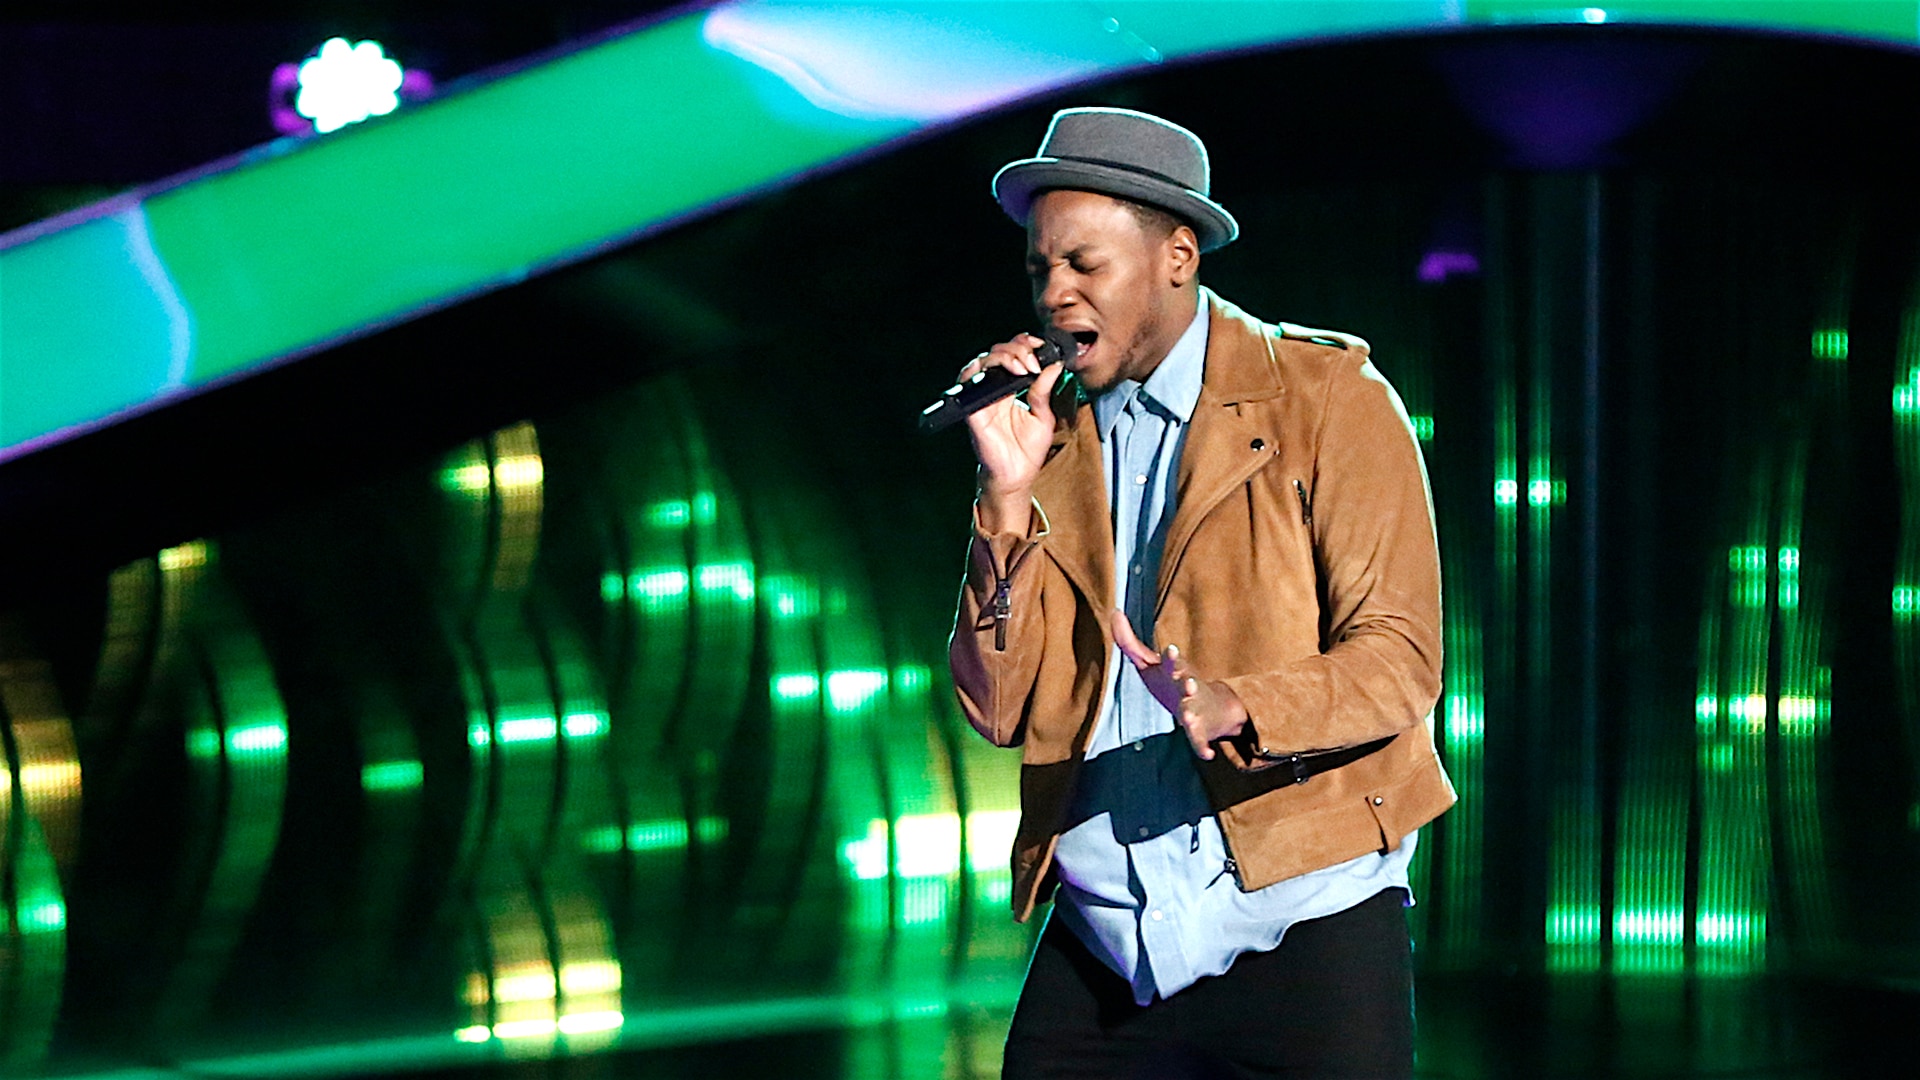 Watch The Voice Highlight: Chris Blue Blind Audition: "The Tracks of My